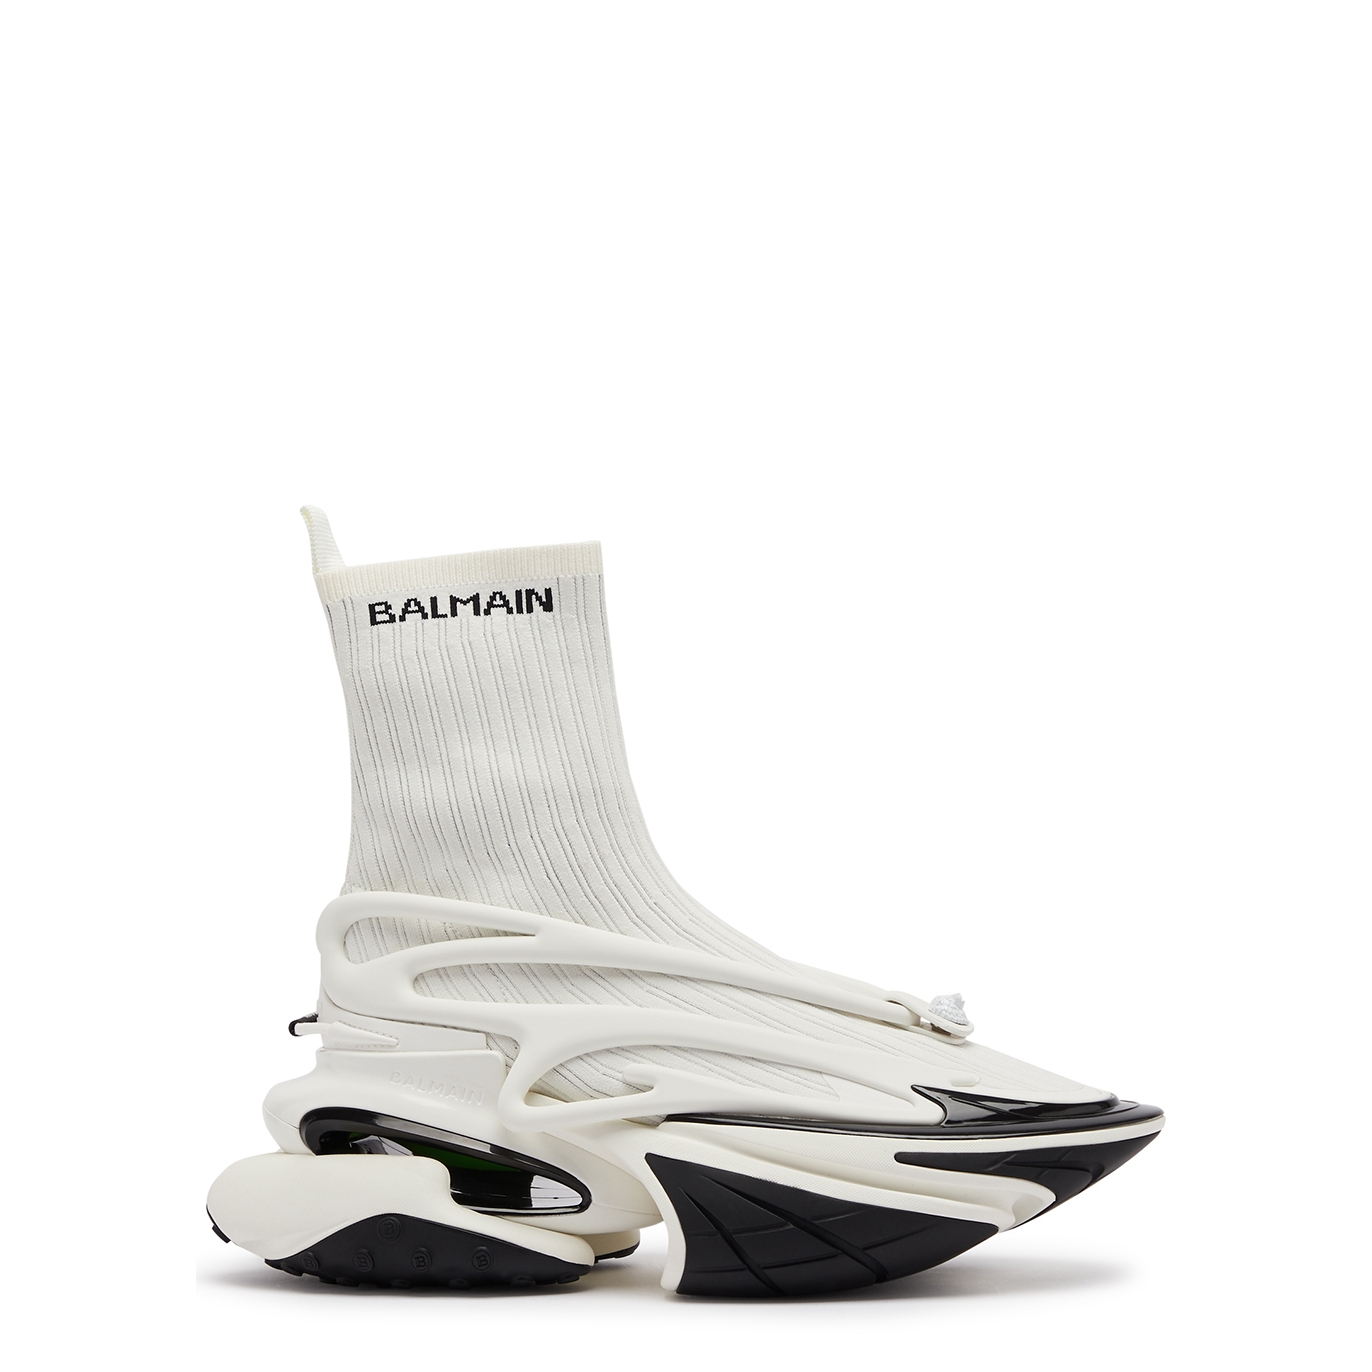 Balmain Unicorn Panelled Stretch-knit Hi-top Sneakers - White And Black - 7